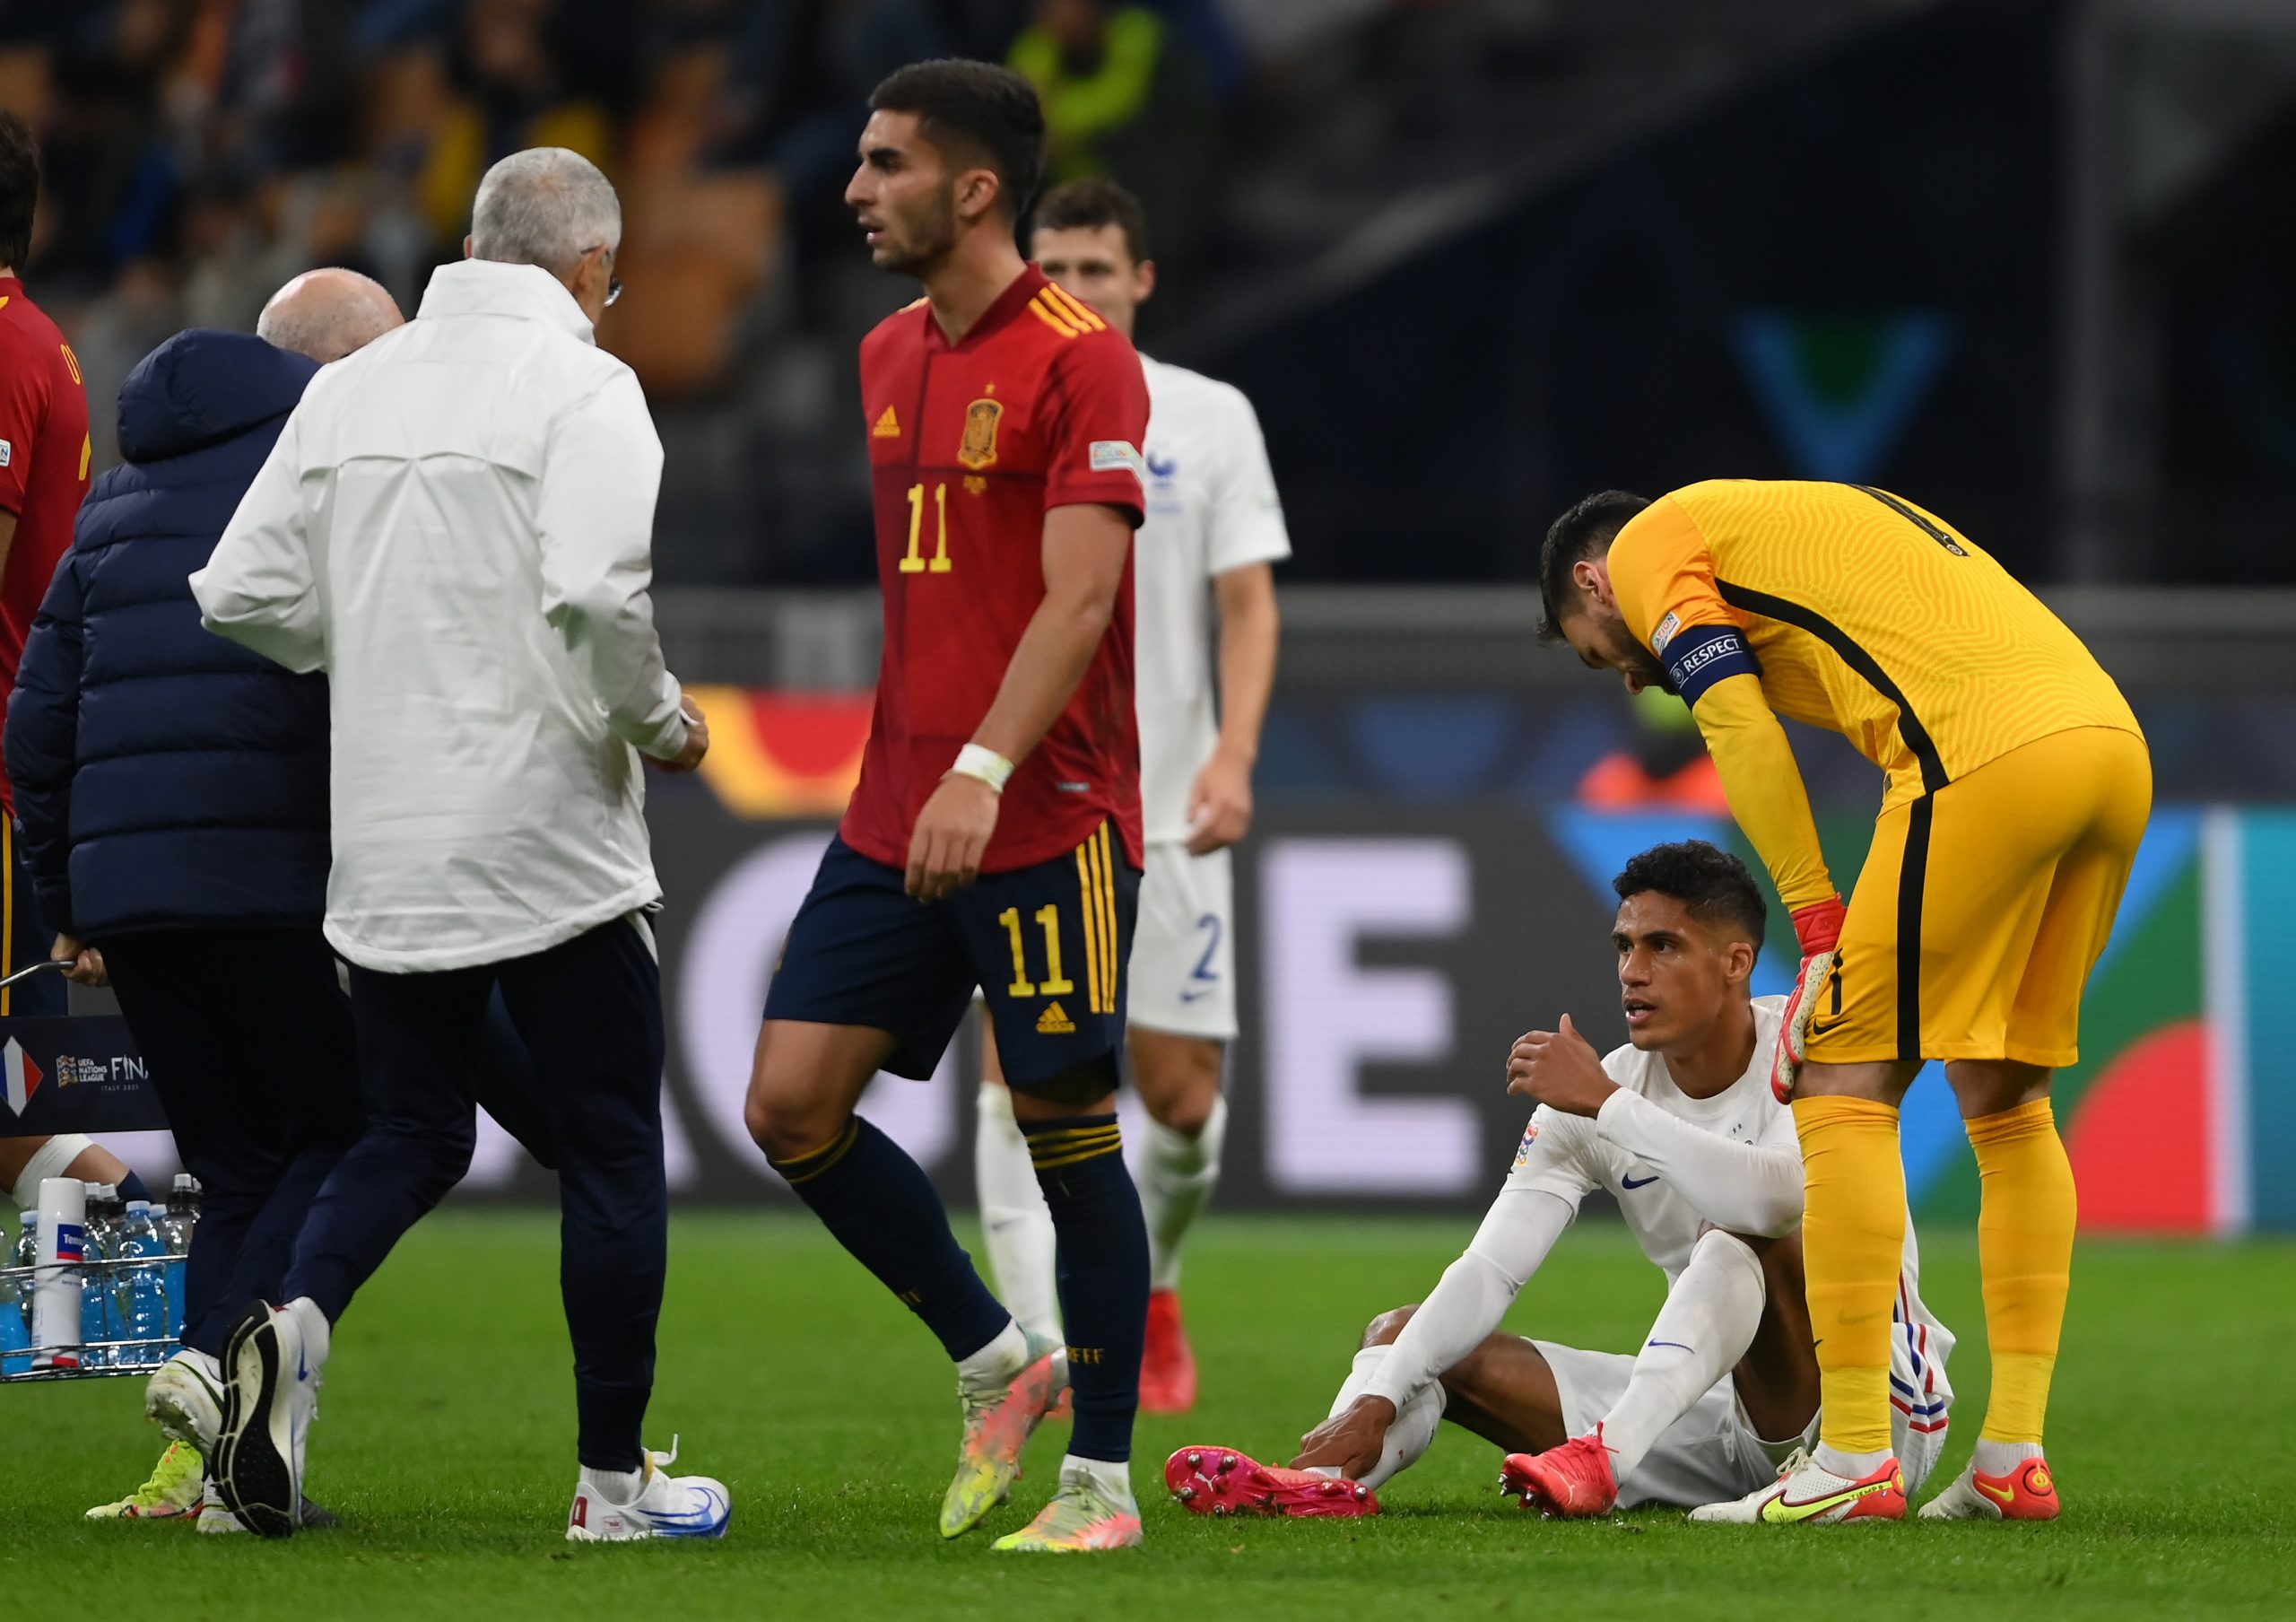 Raphael Varane suffered an injury during the game against Atalanta and is now set to be out of action for a month. (Photo by Mike Hewitt/Getty Images)